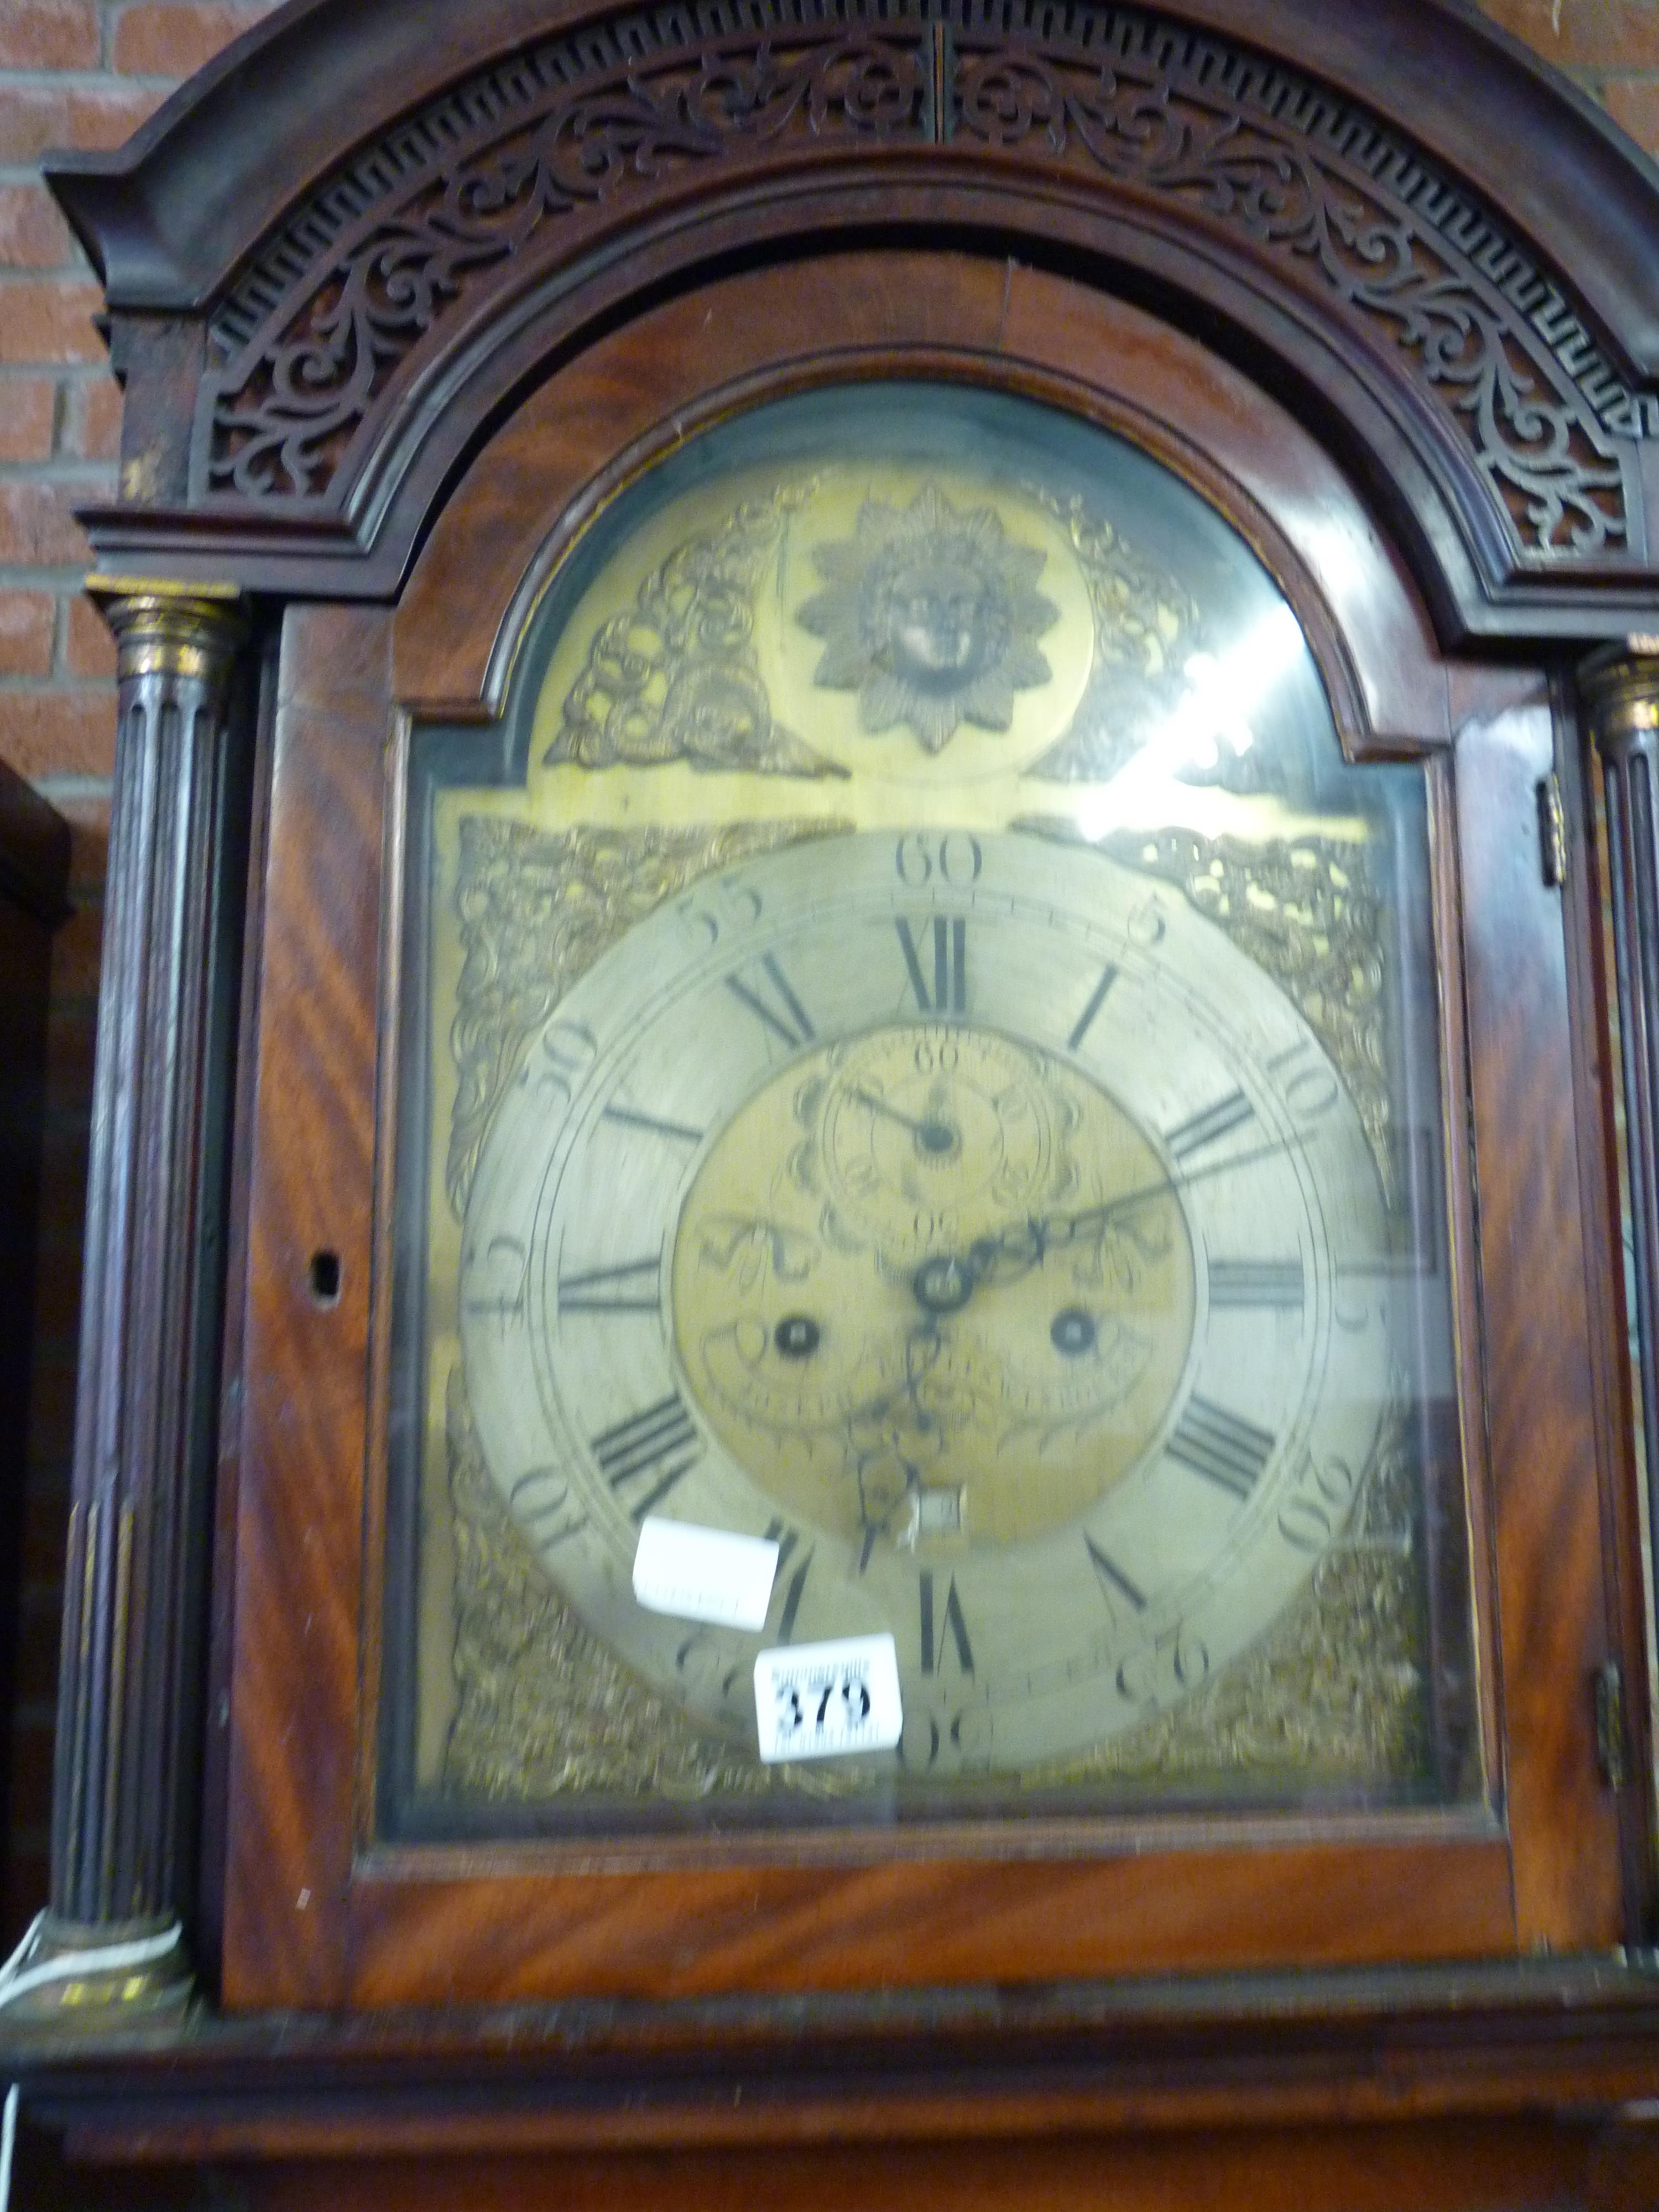 Mahogany Grandfather clock with brass face by Joseph Bowles of Winbourn - Image 2 of 2